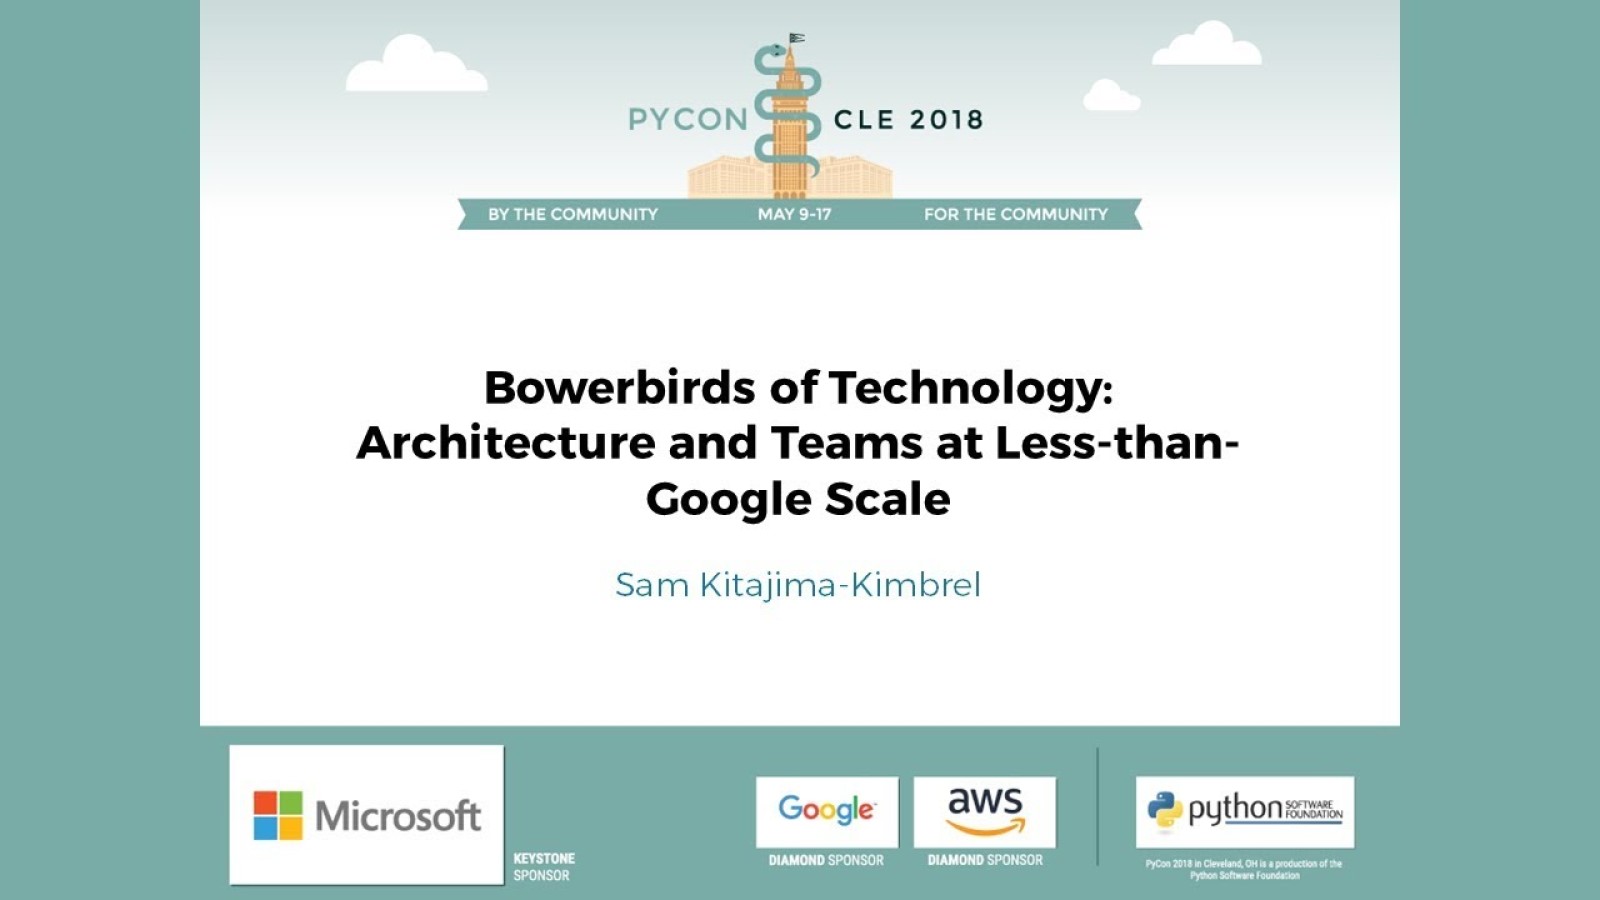 Bowerbirds of Technology: Architecture and Teams at Less-than-Google Scale